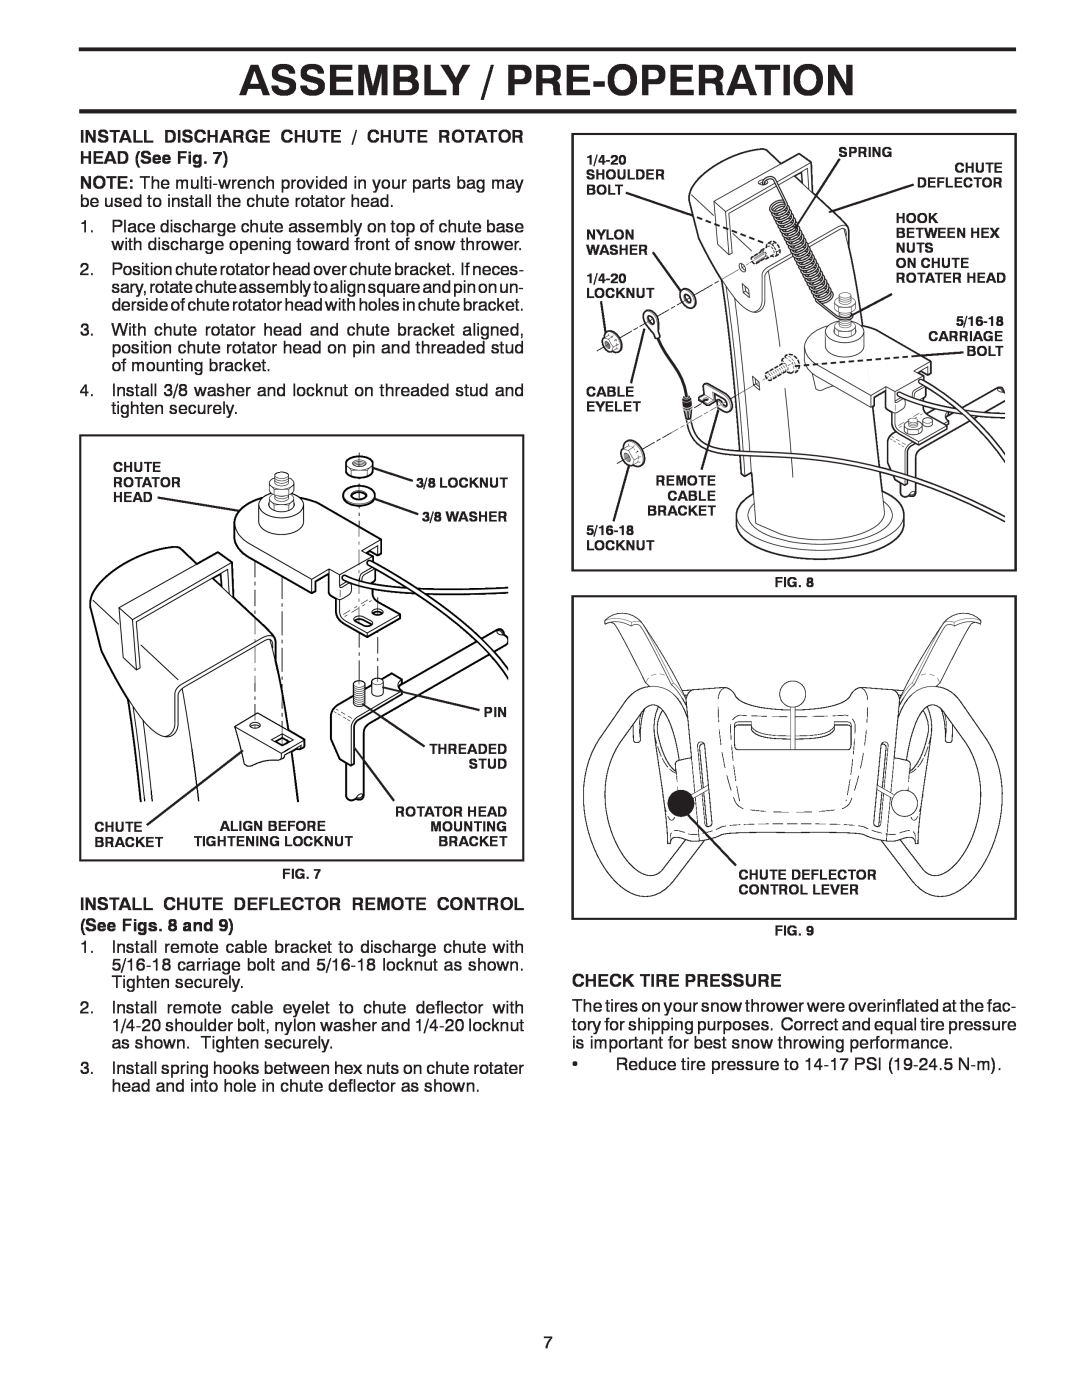 Poulan 421104 Assembly / Pre-Operation, INSTALL DISCHARGE CHUTE / CHUTE ROTATOR HEAD See Fig, Check Tire Pressure 